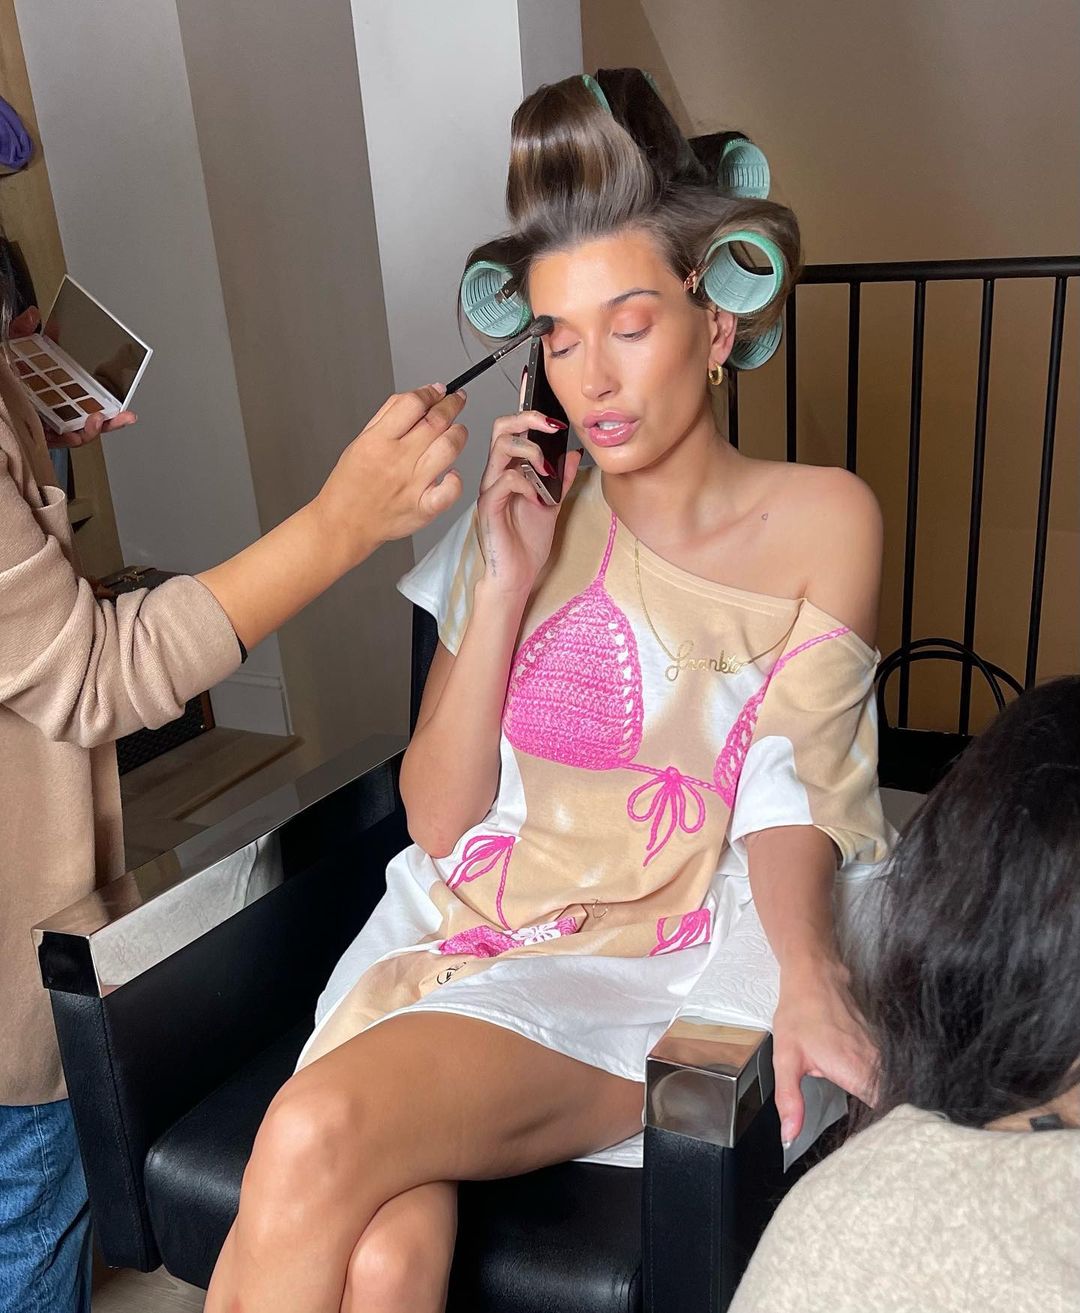 Hailey Bieber is Ready for Summer! - Photo 32